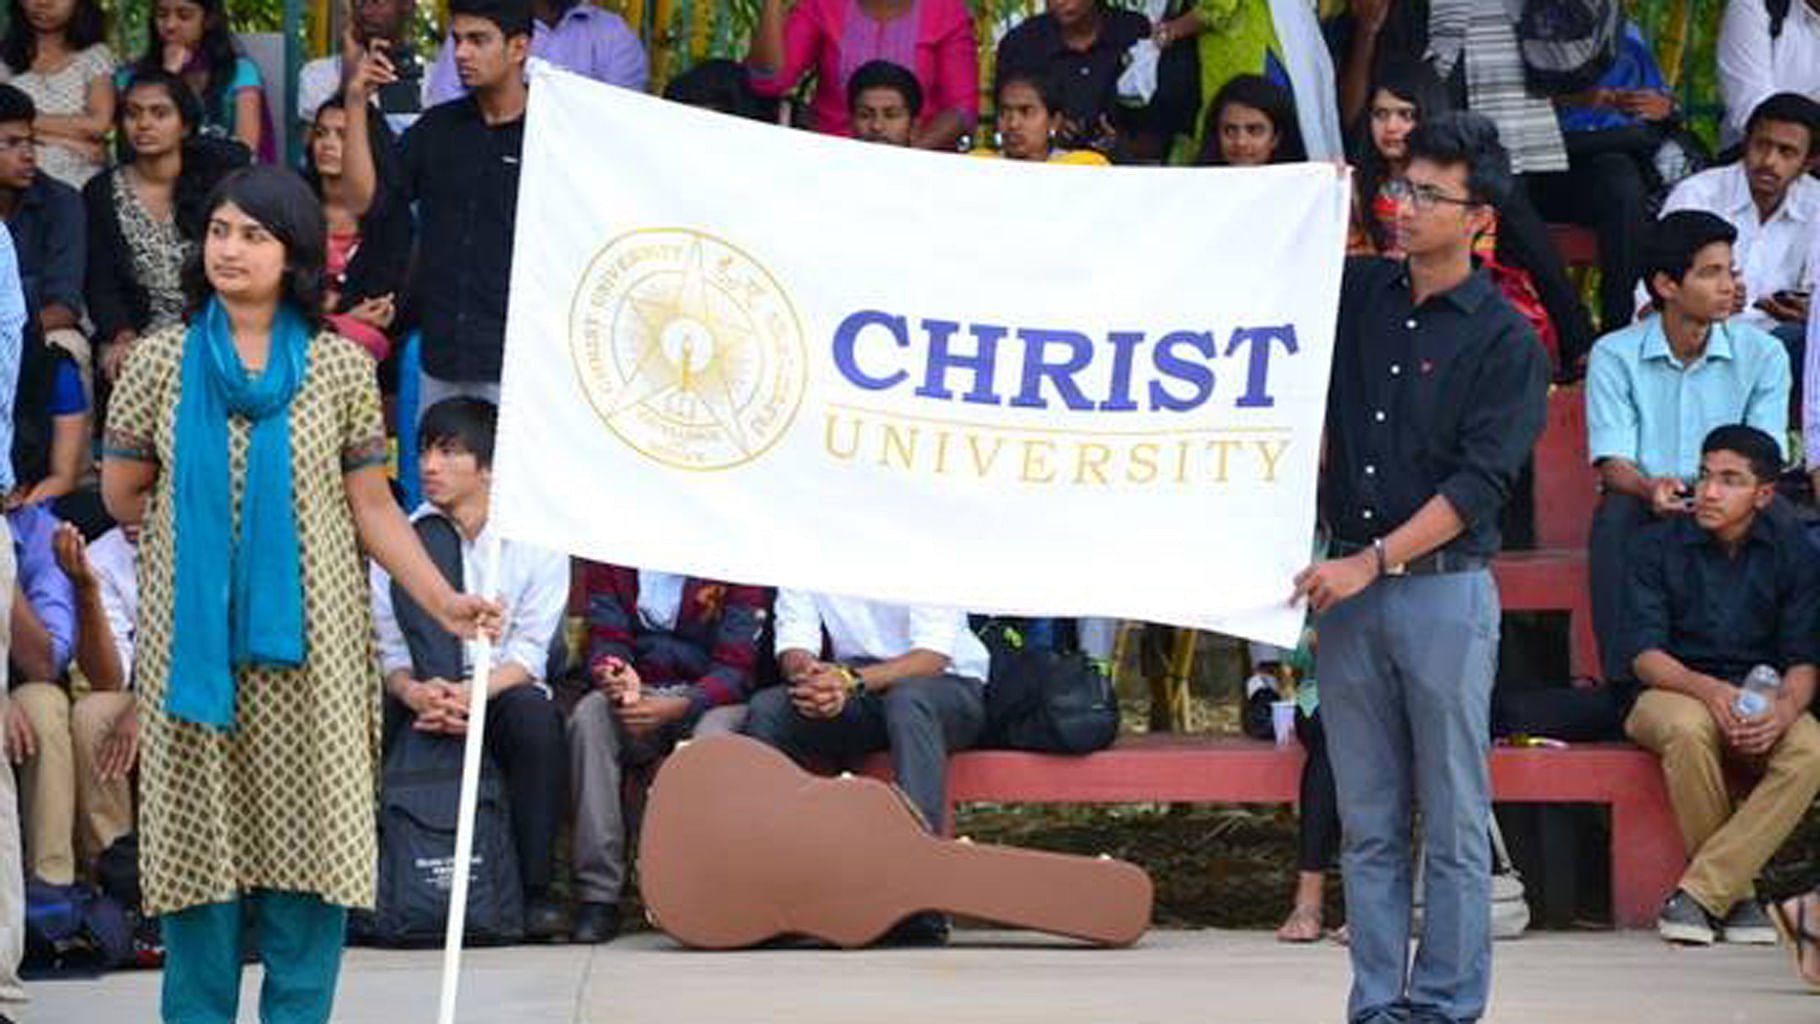 

After recent reports about Christ University, many former students are narrating their own experiences with the institution’s ‘strict rules’. (Photo Courtesy: <a href="https://www.facebook.com/christ.university/photos/a.783259525076957.1073741927.170966439639605/783259831743593/?type=3&amp;theater">Facebook/Christ University</a>)